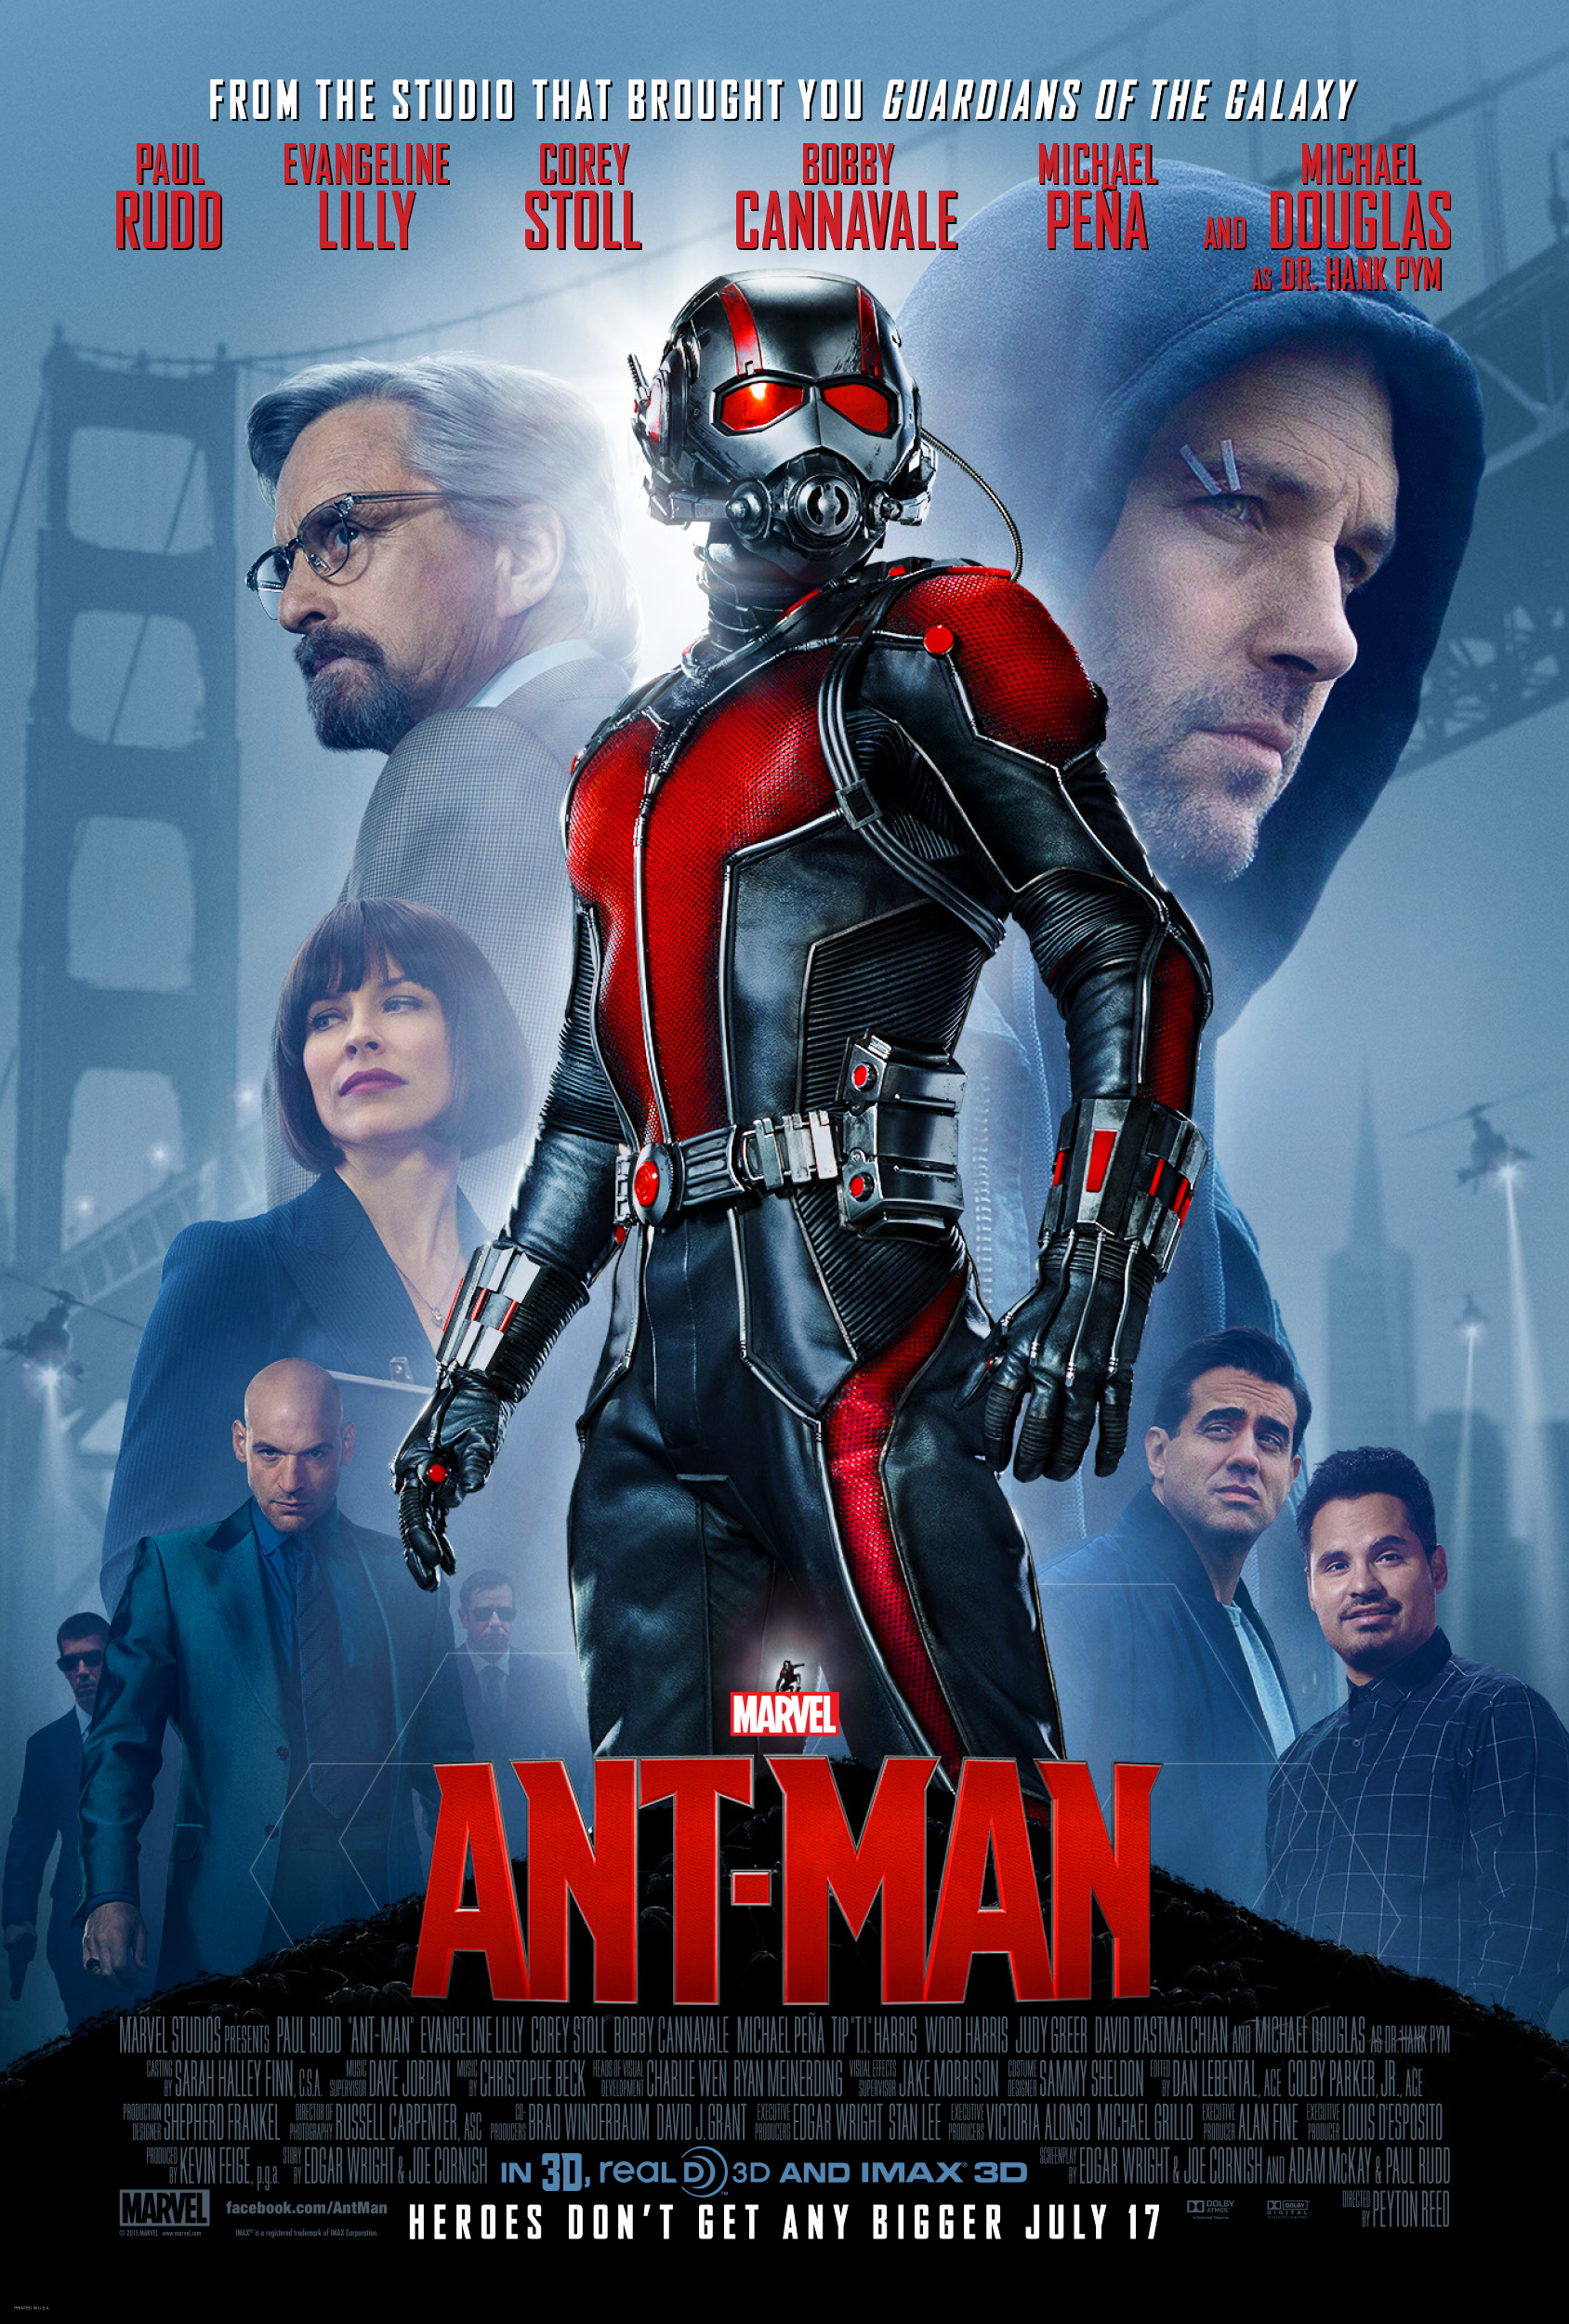 File:D23 Expo 2015 Ant-Man (1).jpg - Wikimedia Commons